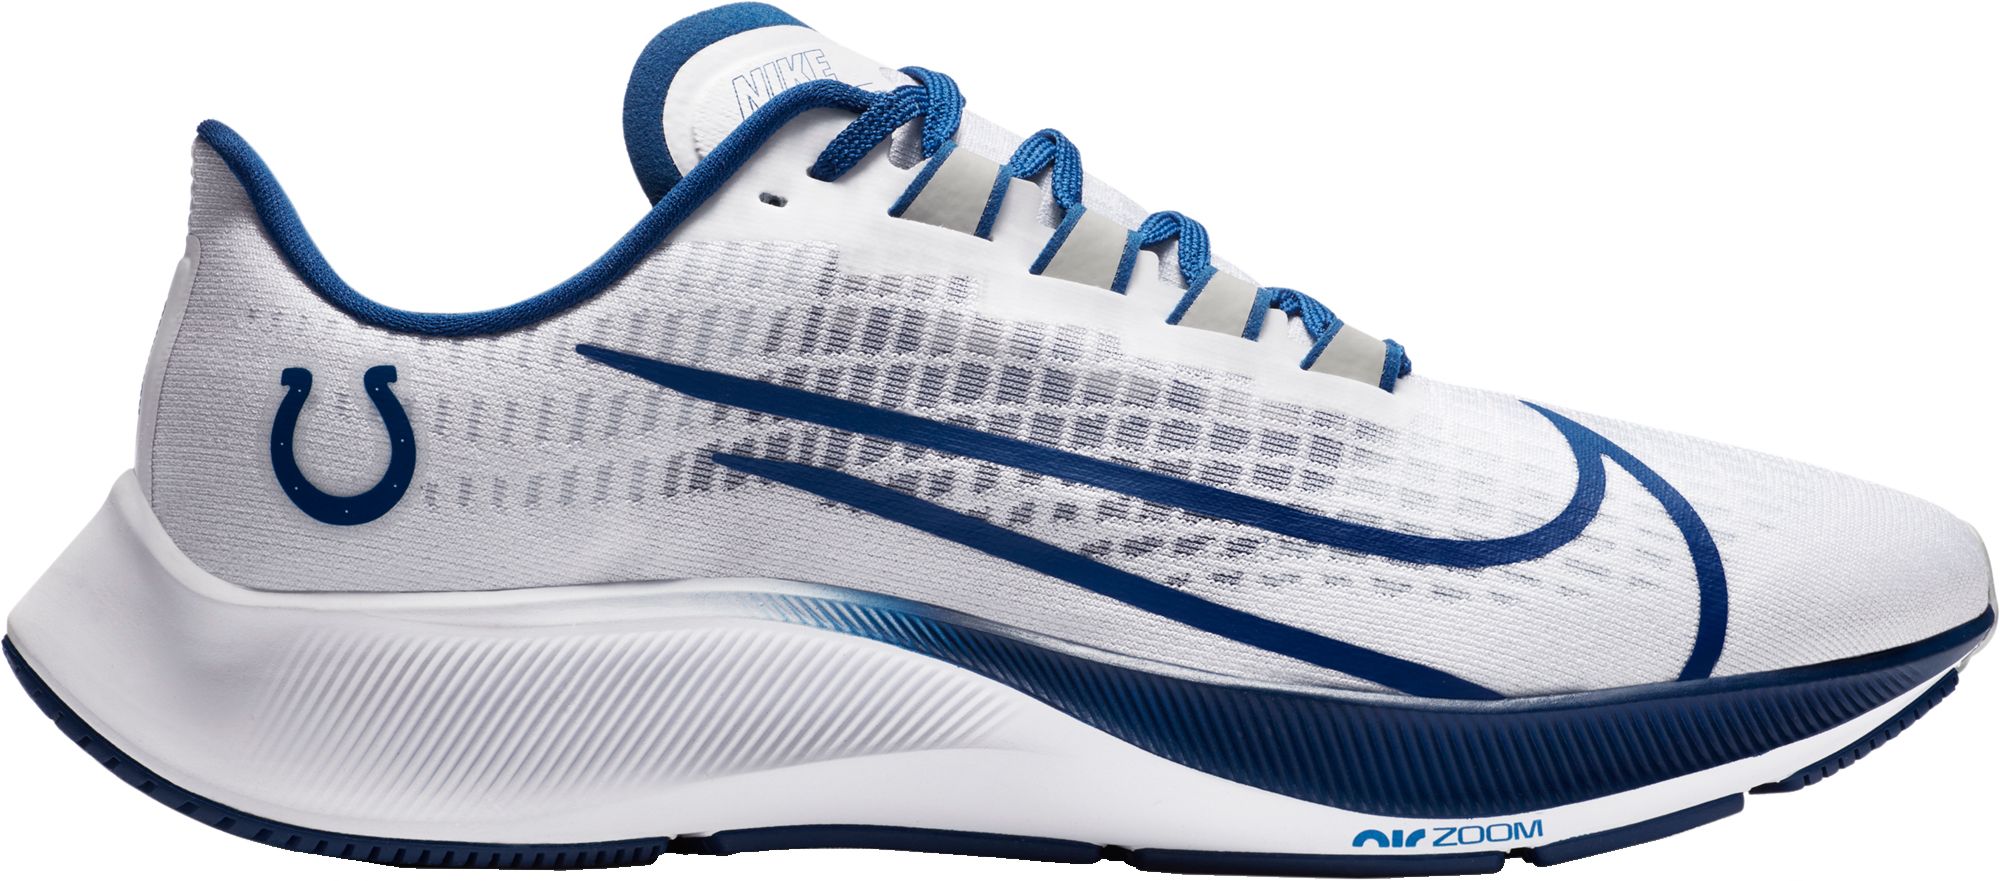 Nike Indianapolis Colts Air Zoom 